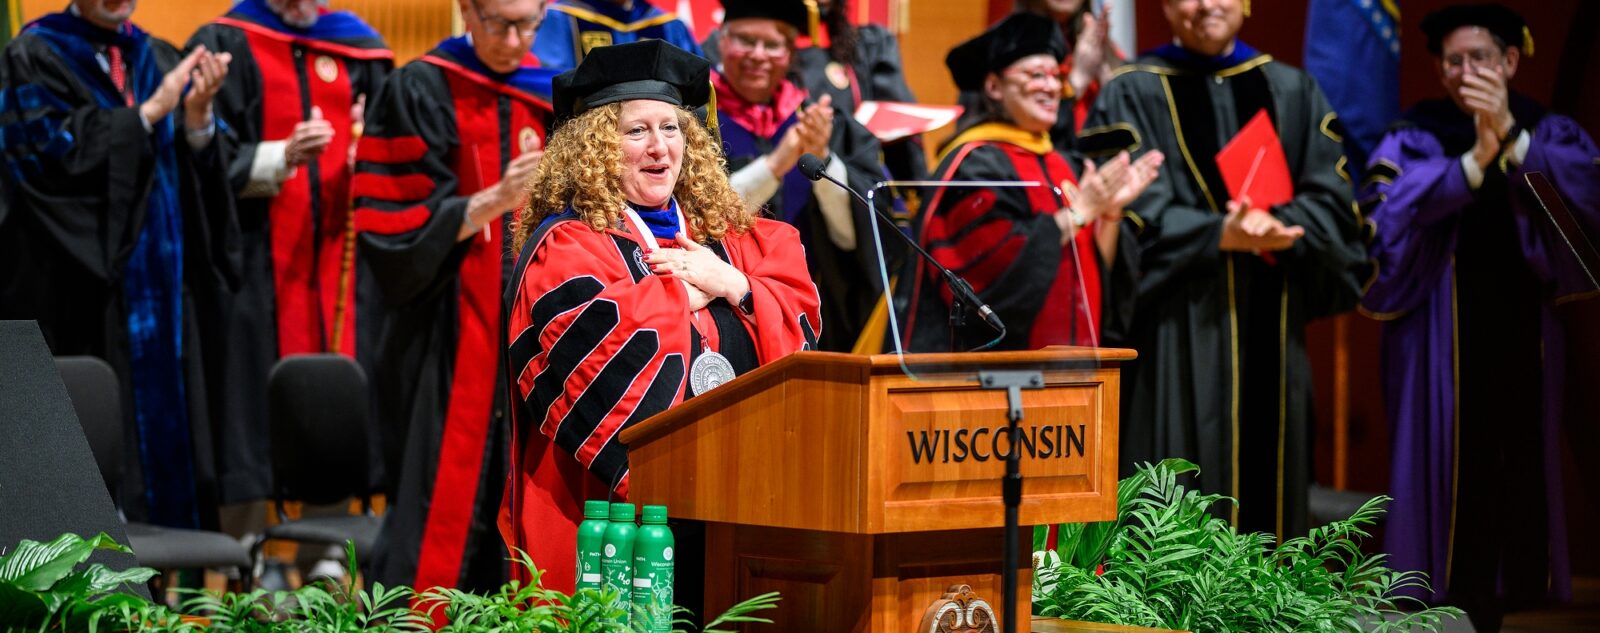 Jennifer Mnookin stands on stage with a crowd of dignitaries, all wearing academic regalia. Mnookin folds her hands on her heart in a gesture of gratitude as she makes an address from a wooden podium with the word 